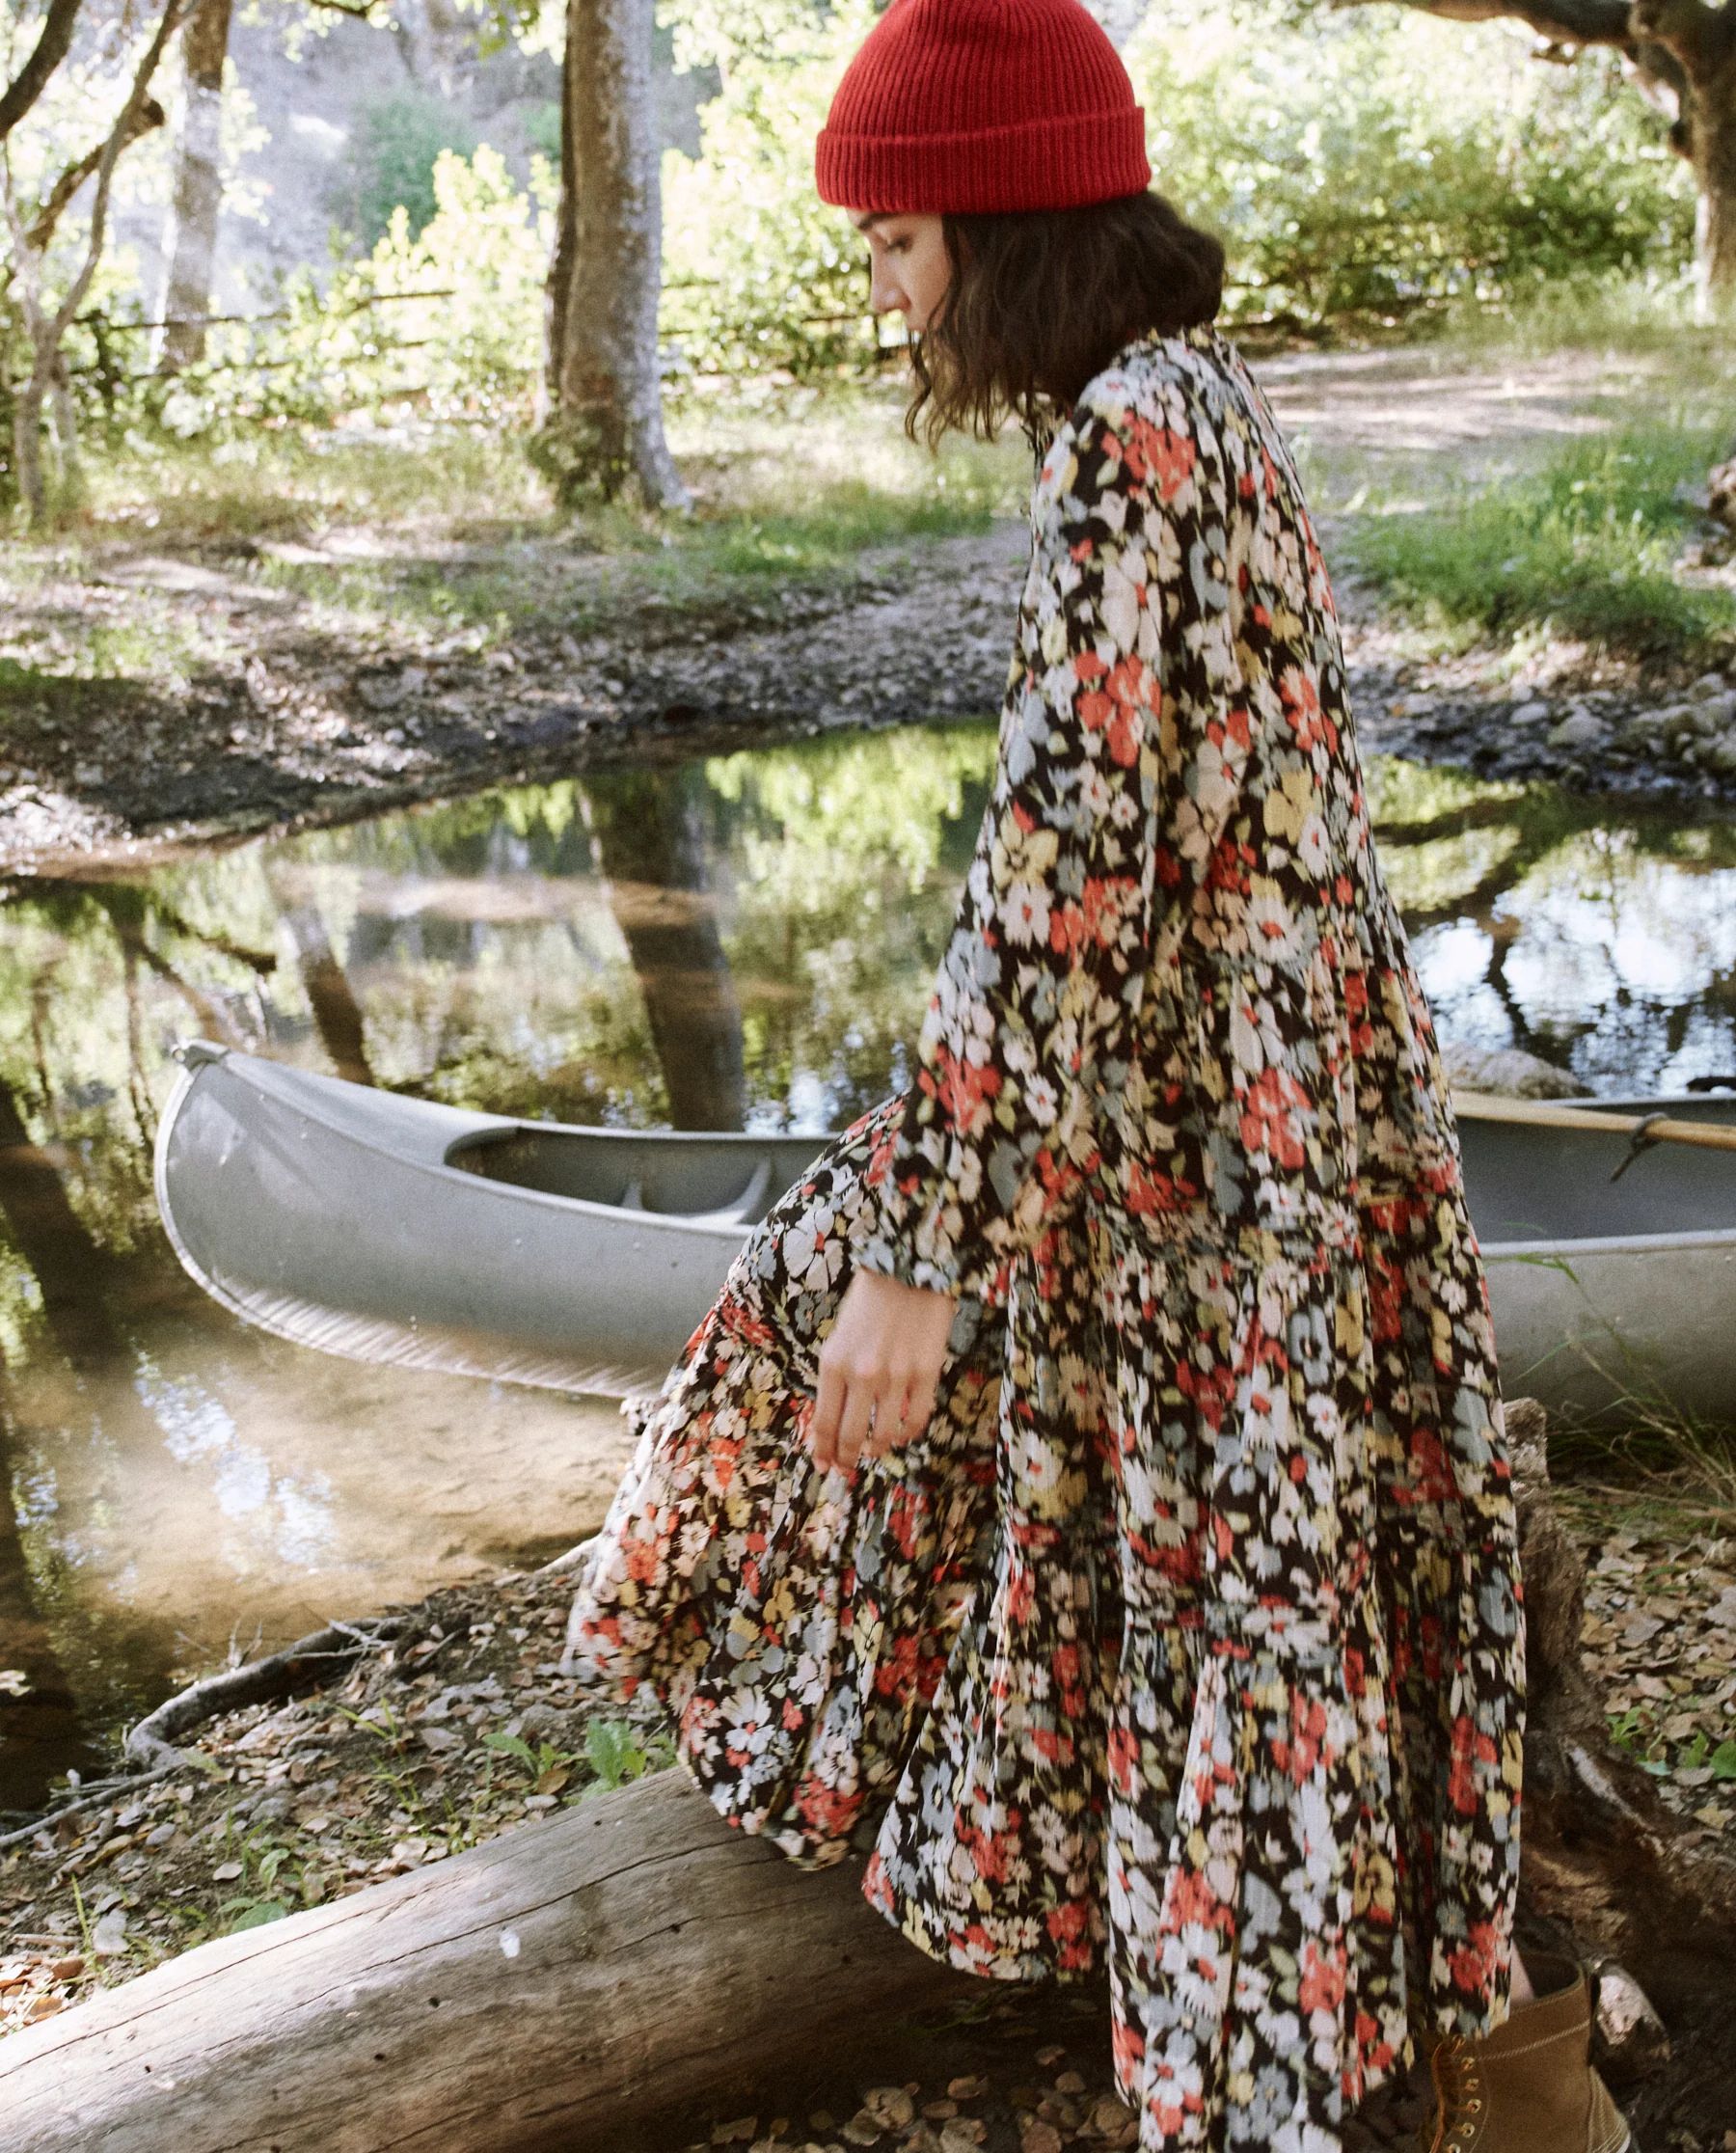 The Pasture Dress. | THE GREAT.